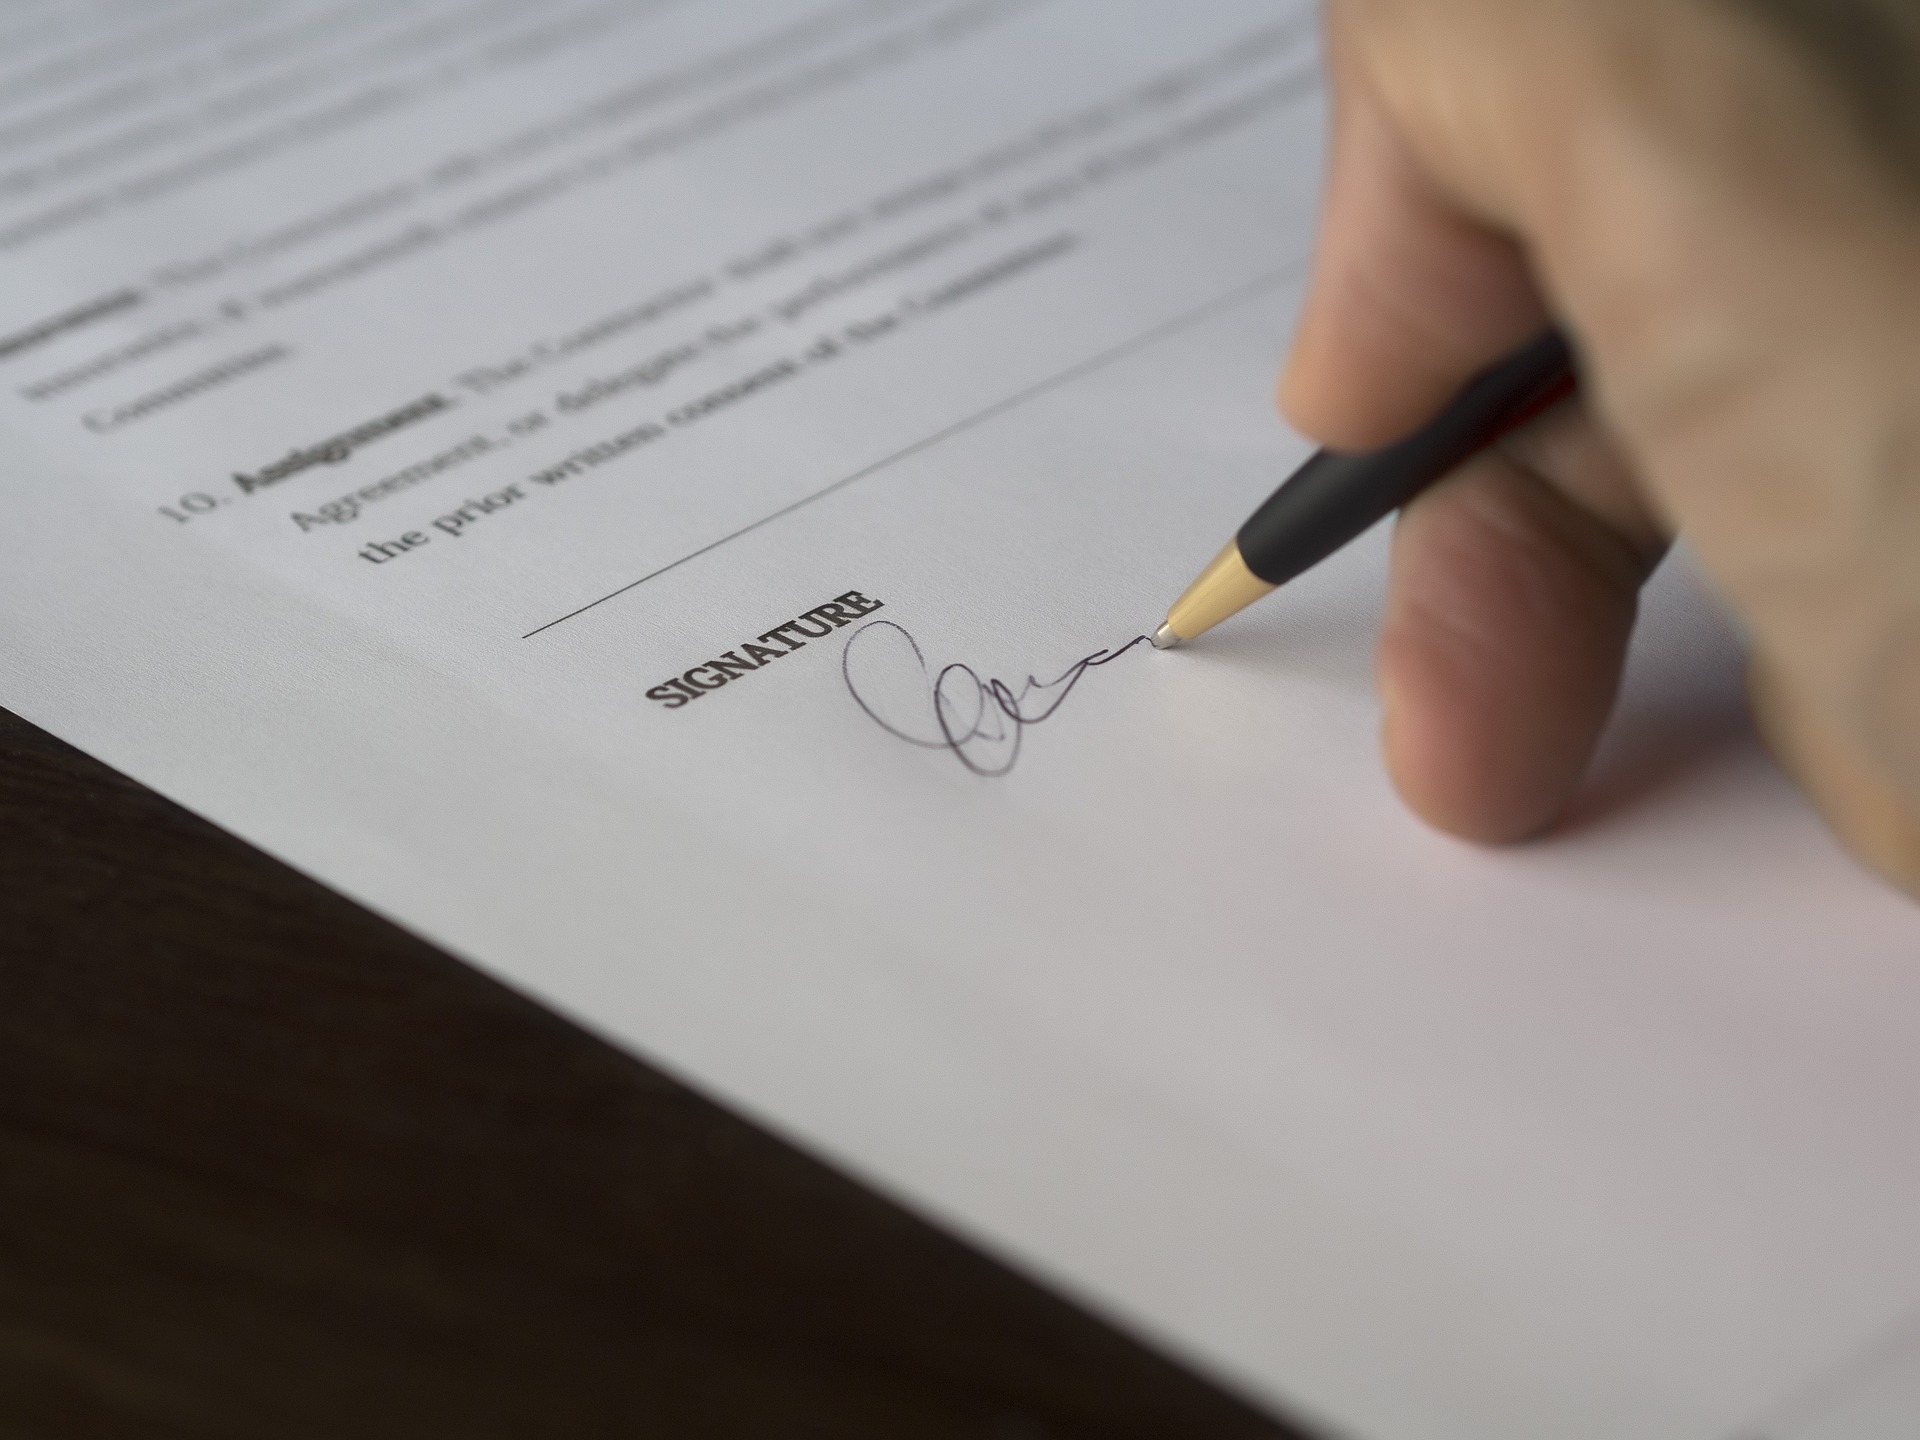 Mastering service level agreements and contracts training